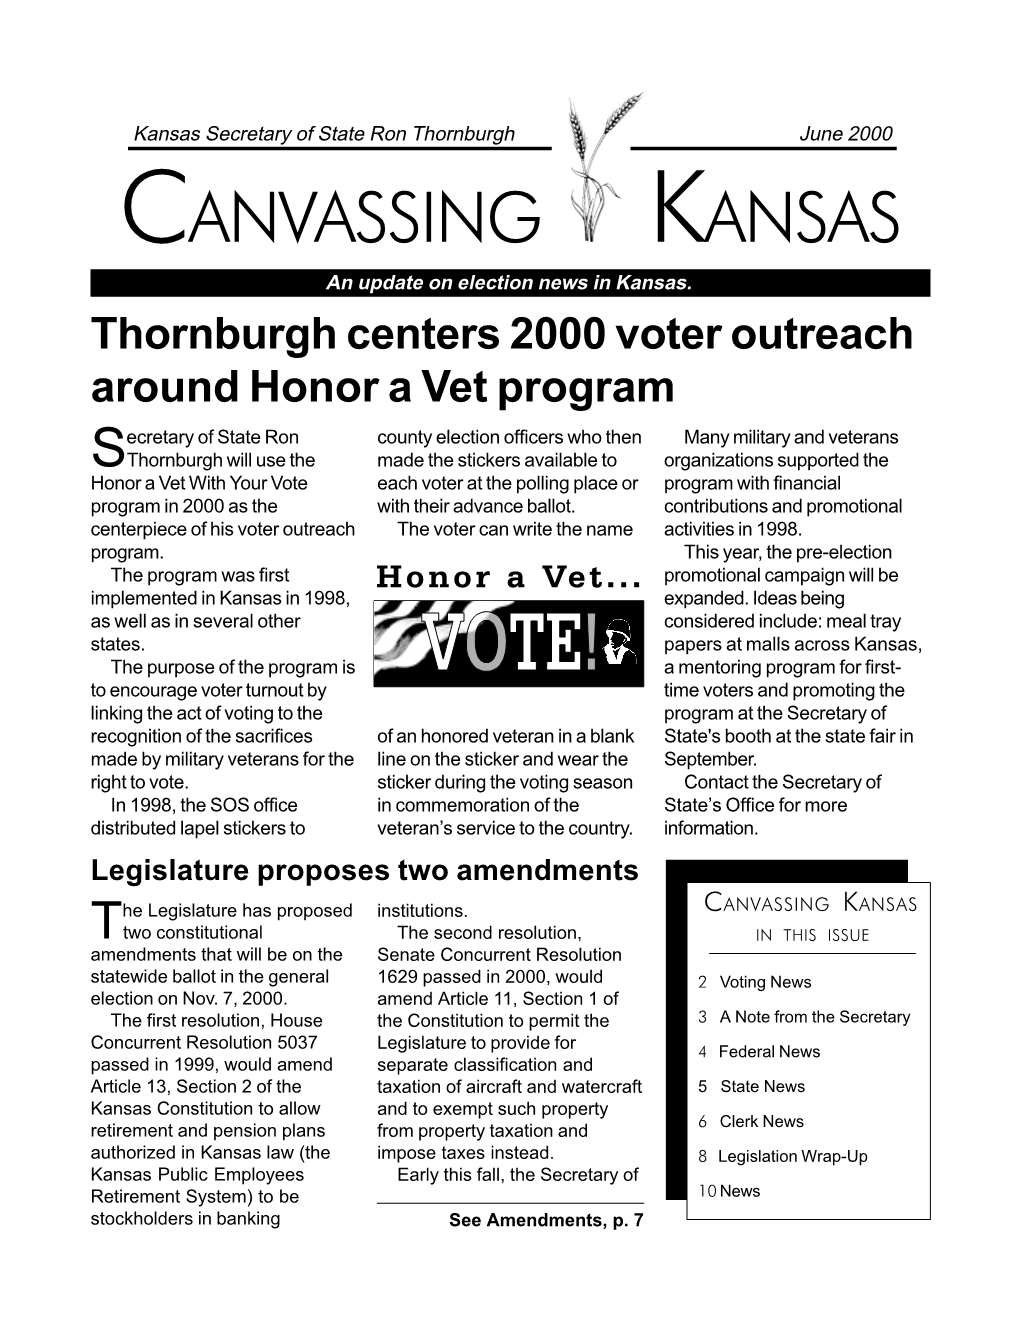 CANVASSING KANSAS an Update on Election News in Kansas